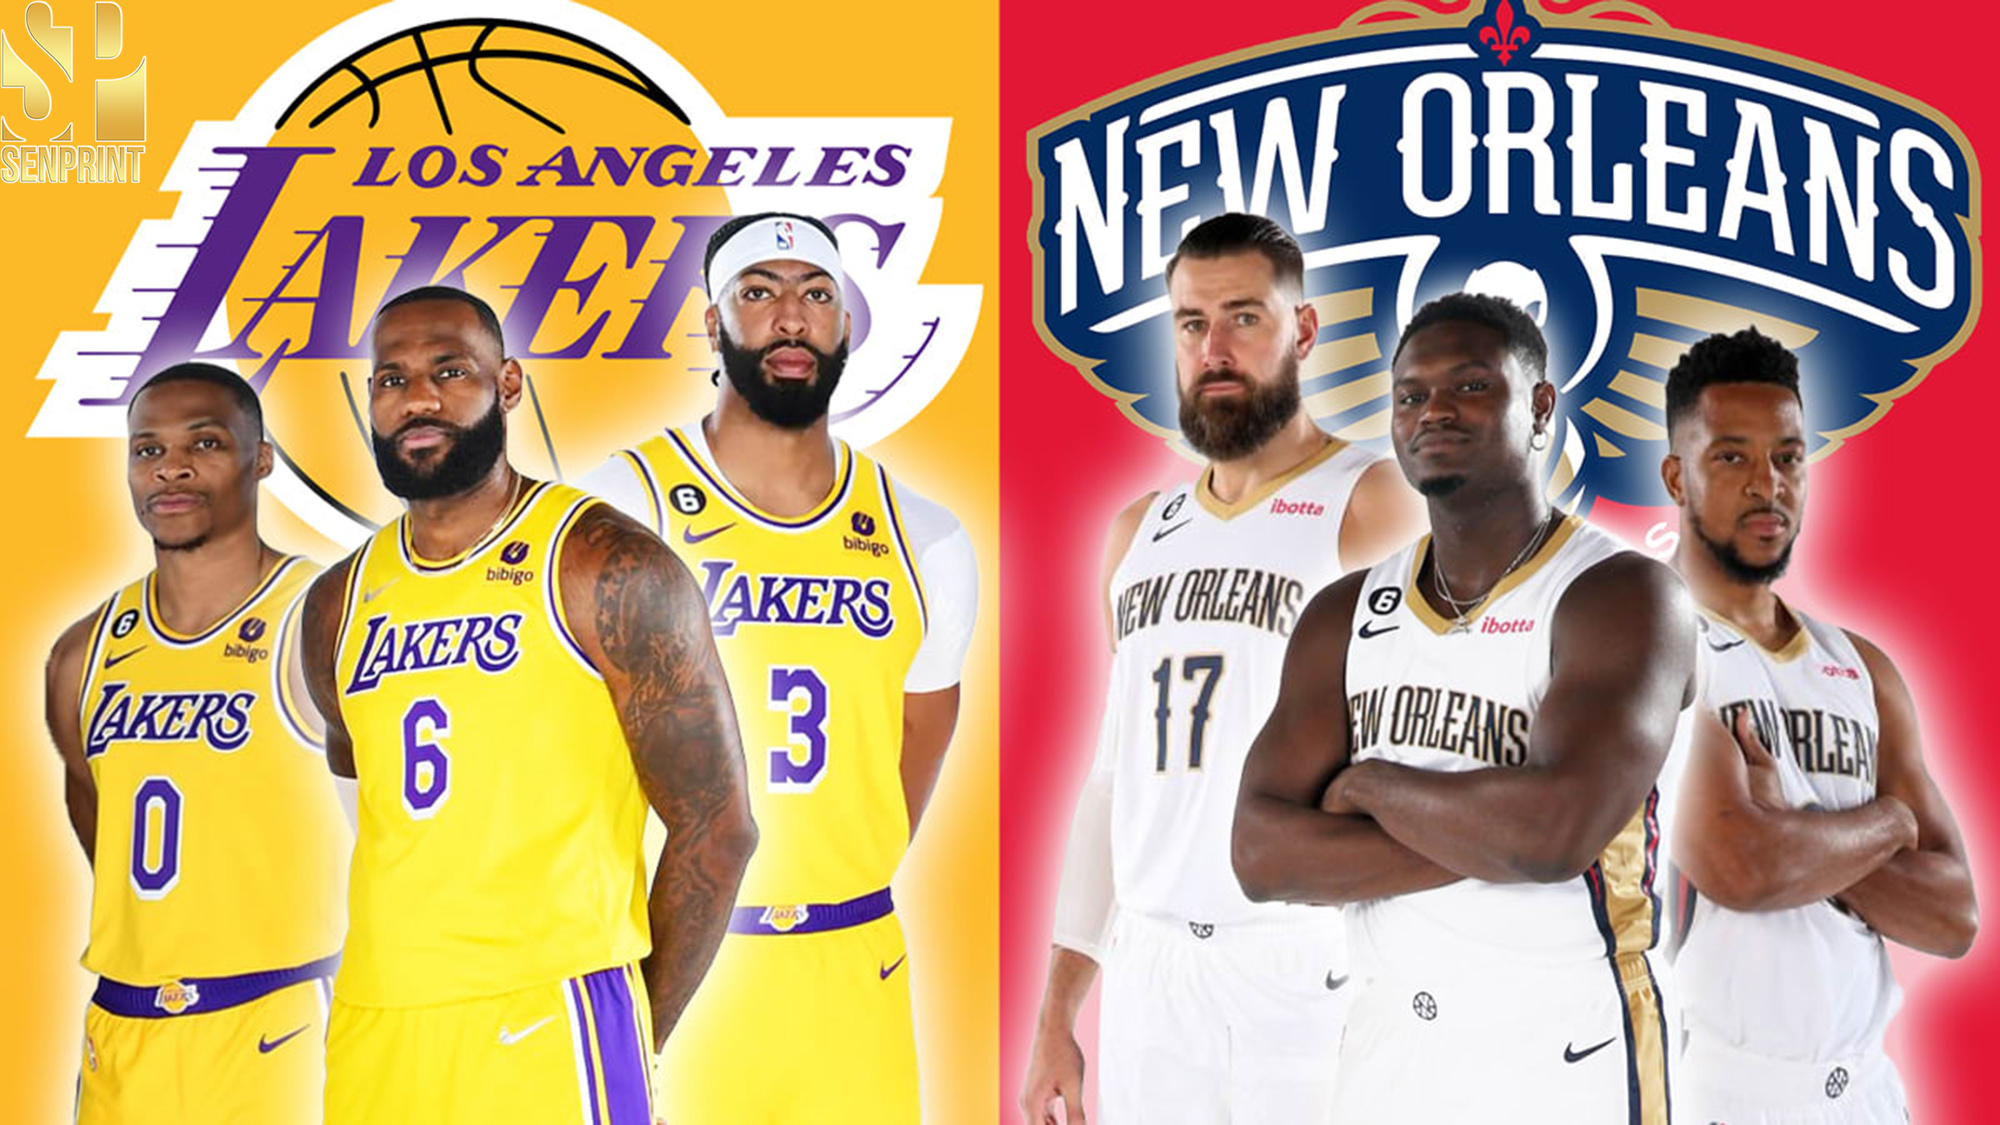 A Clash of Titans Anticipating the High-Stakes Showdown Between New Orleans Pelicans and Los Angeles Lakers in the NBA In-Season Tournament